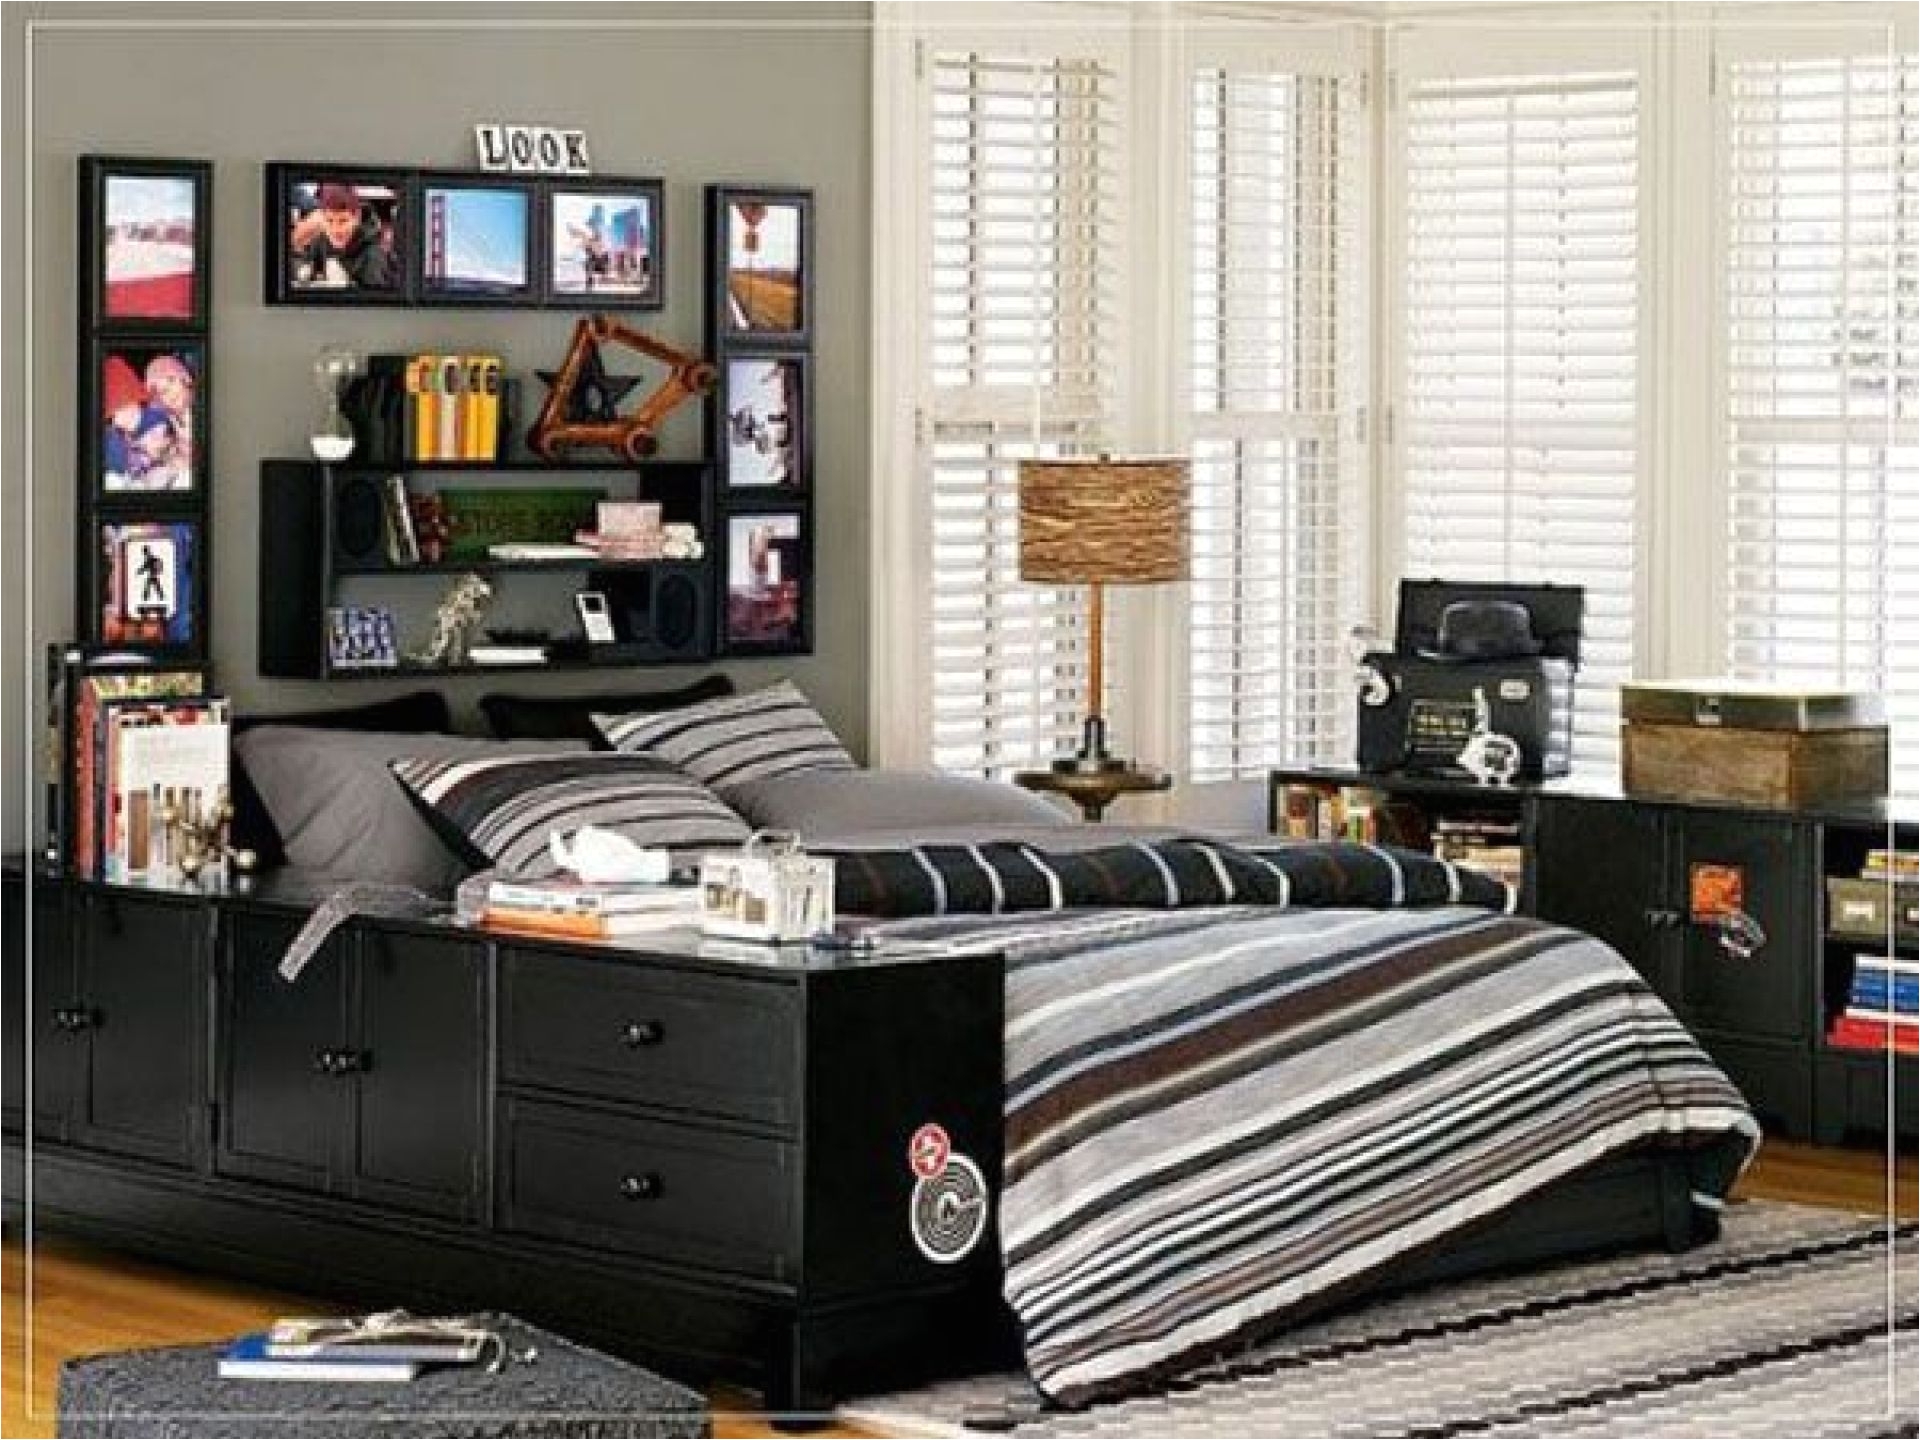 bedroom ideas for teenage guys with small rooms Google Search